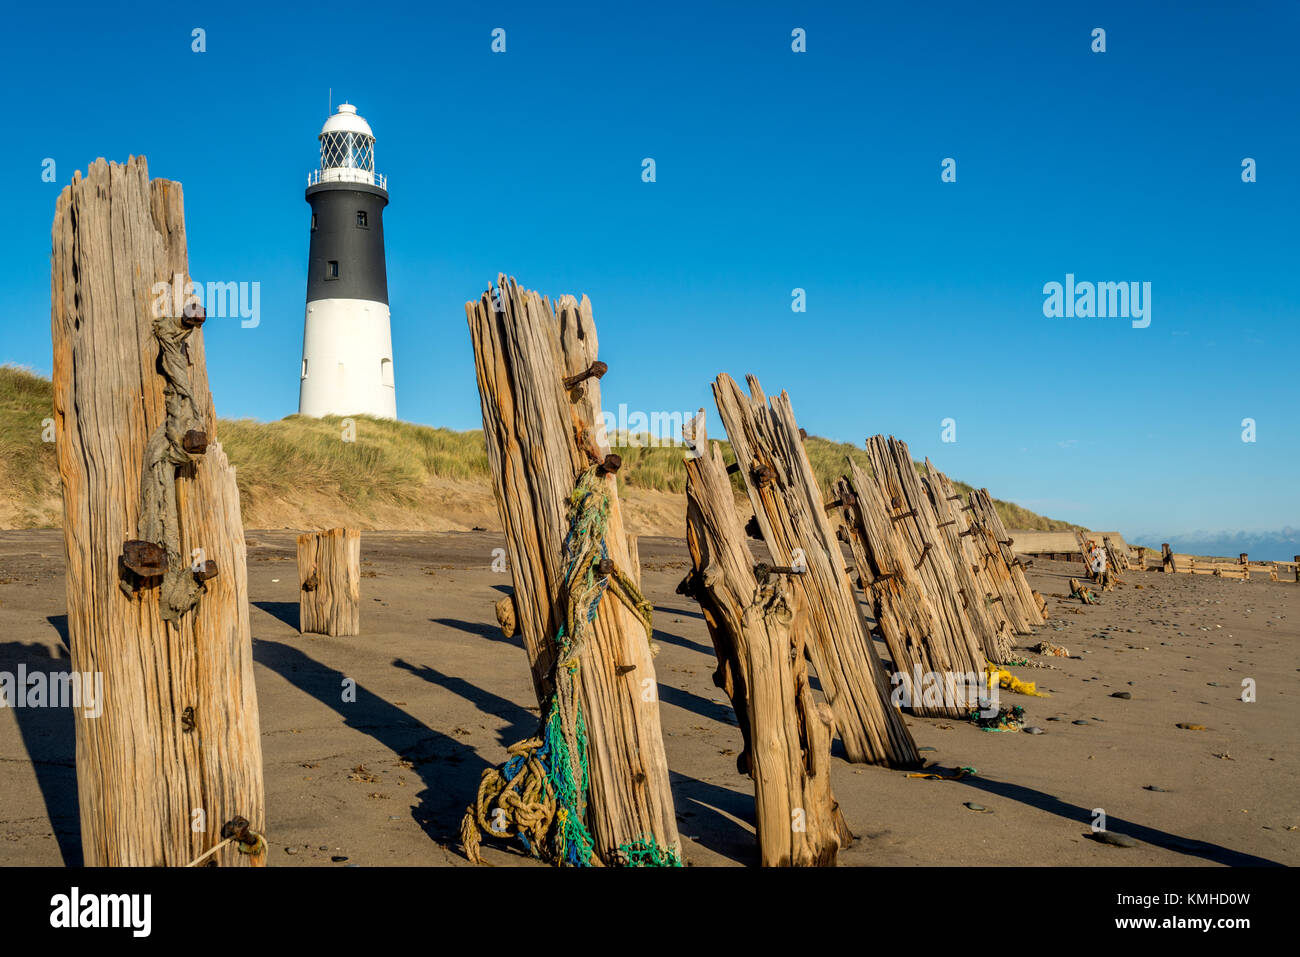 Spurn Point lighthouse and old wooden beach sea defences Stock Photo